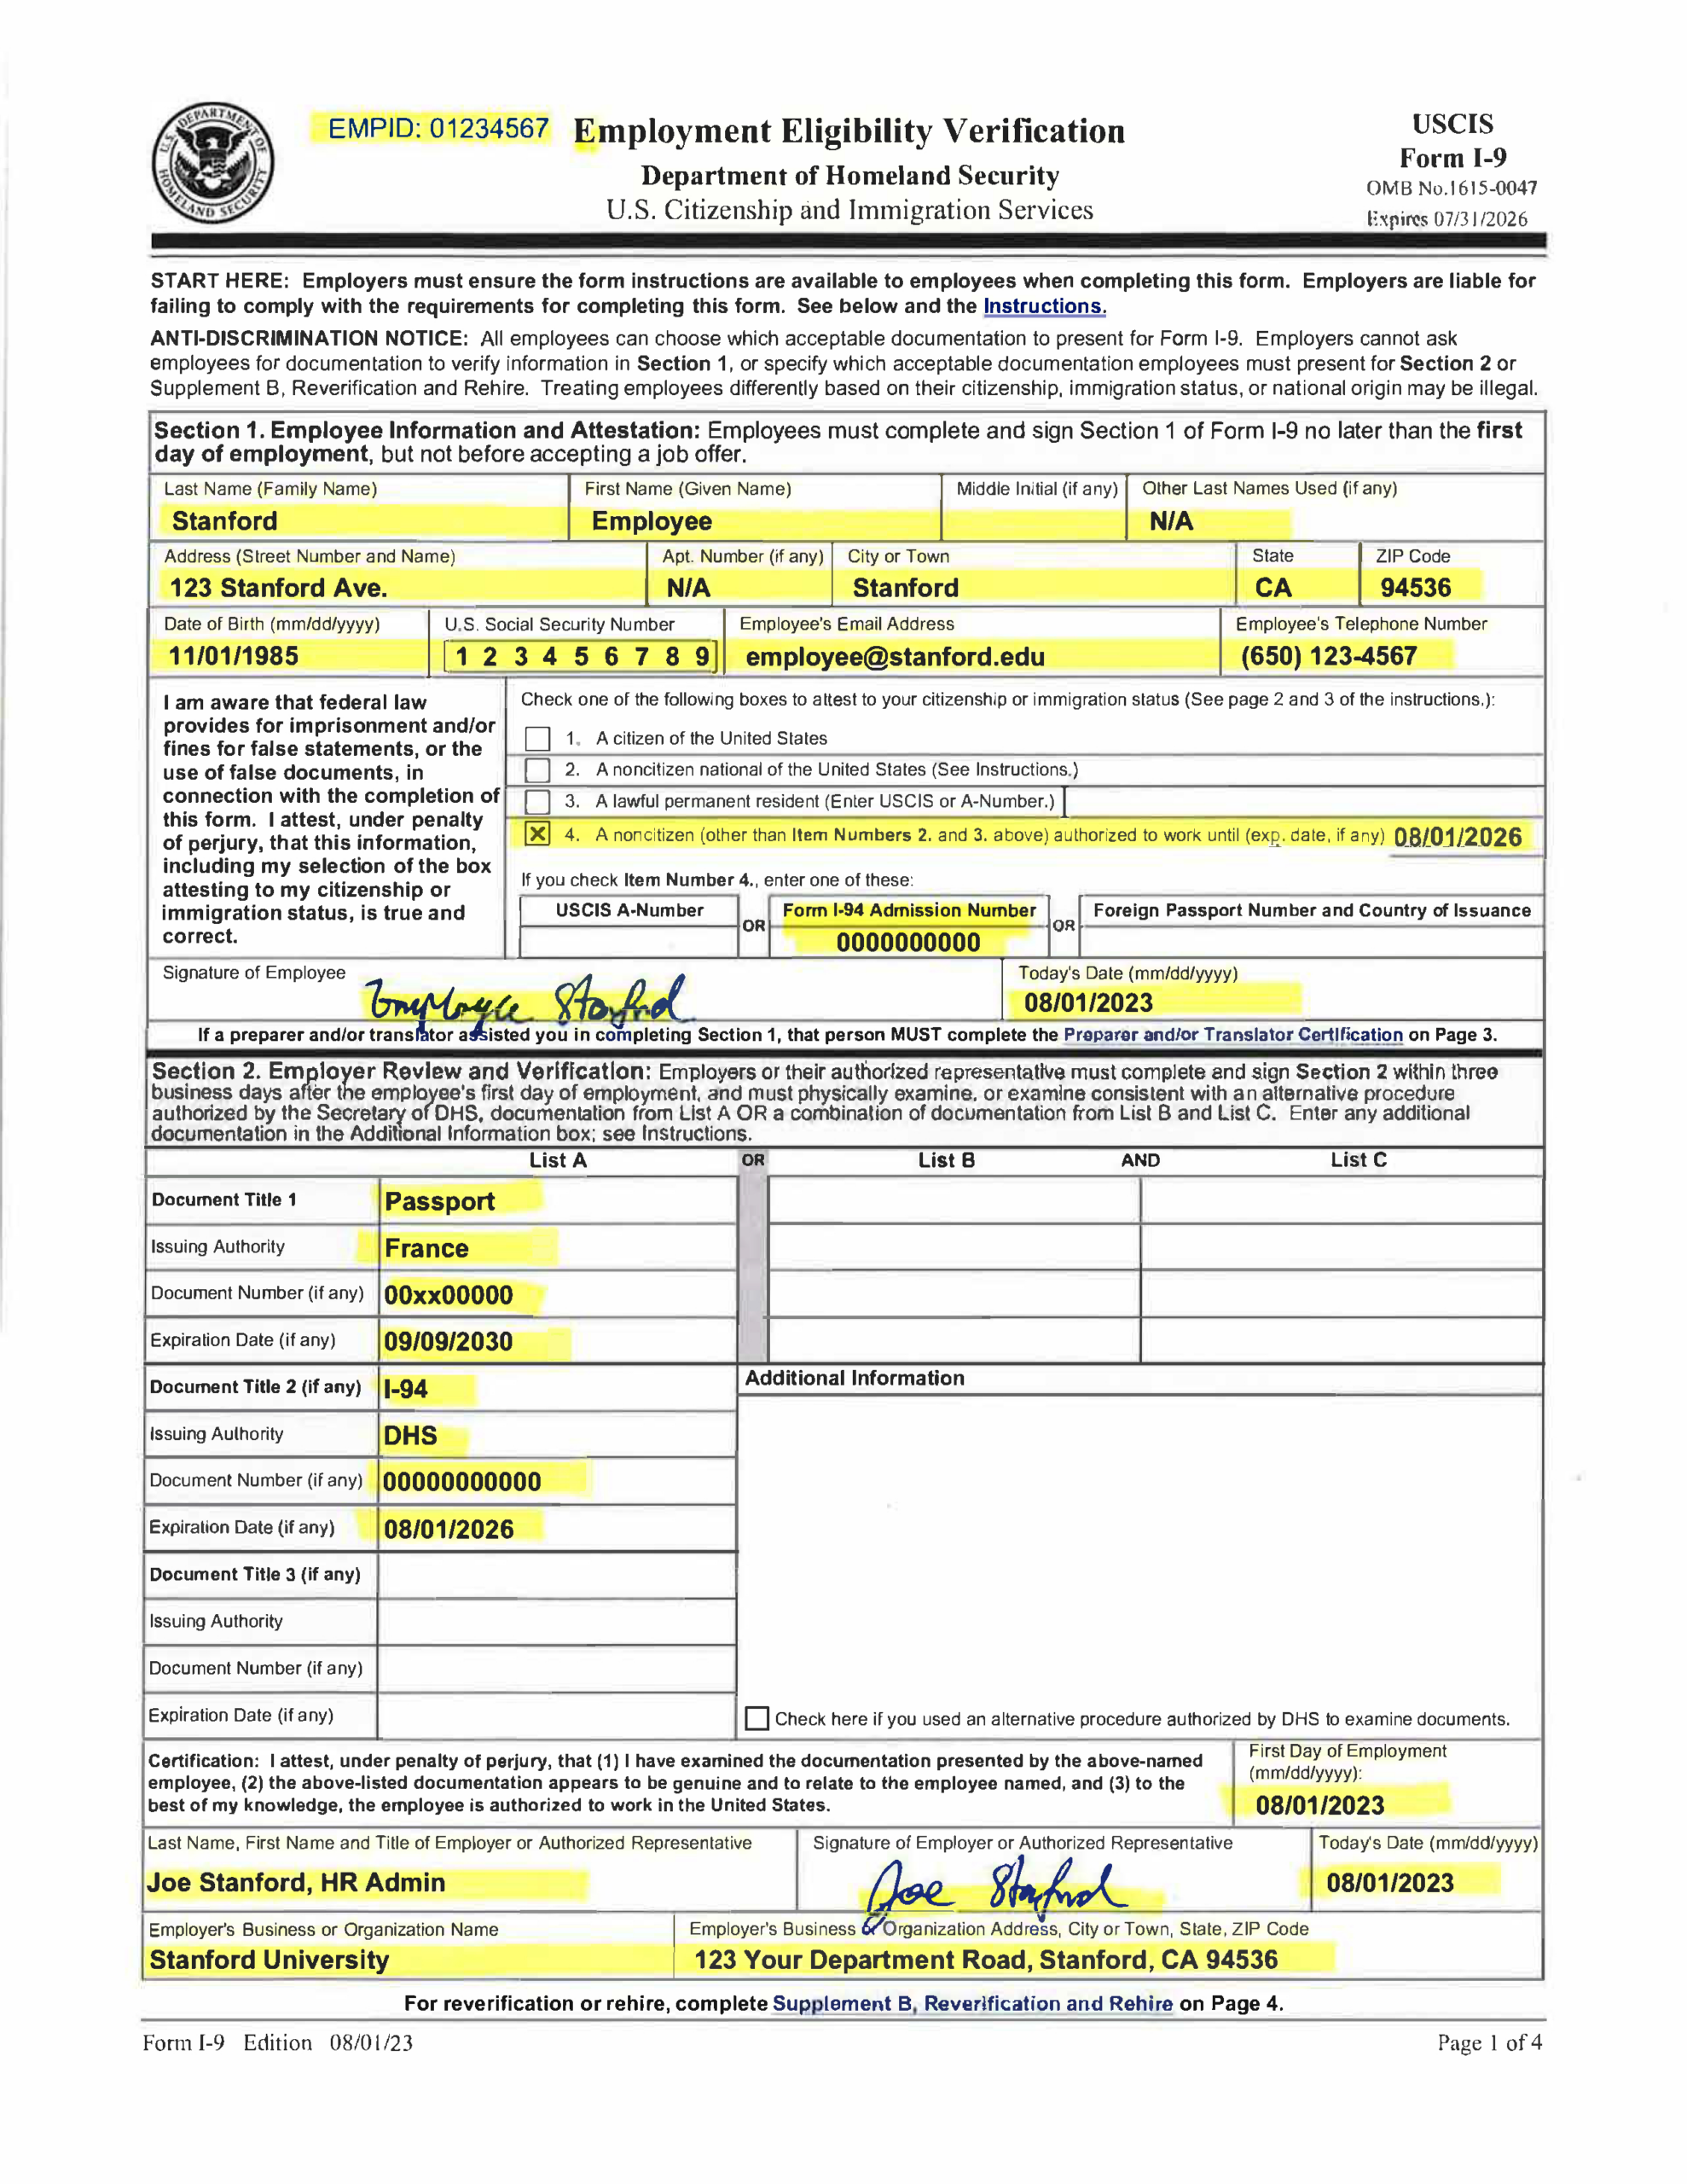 Examples Of Completed Form I-9 For Stanford with regard to I9 Form From USCIS